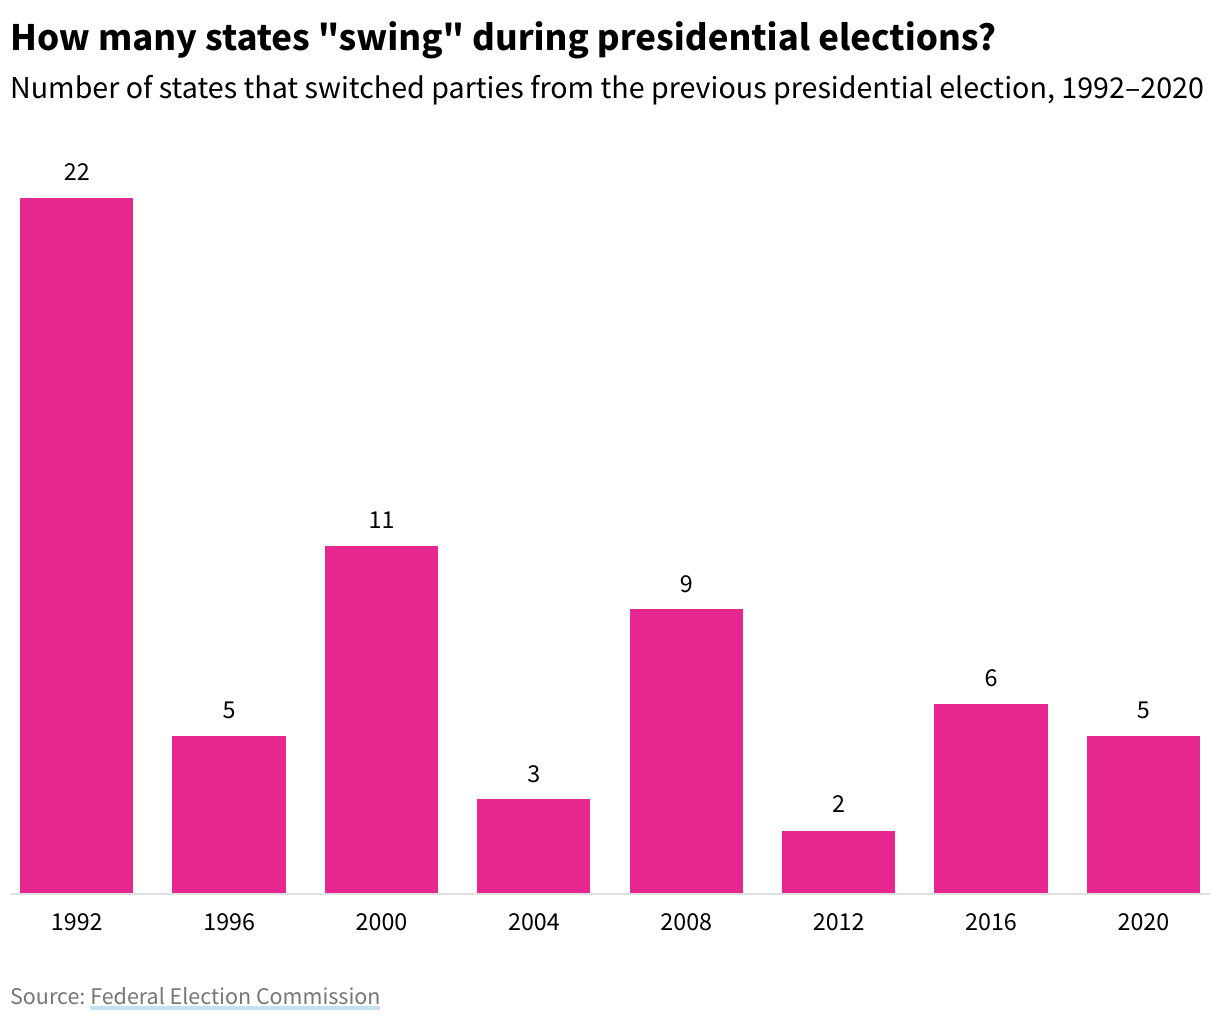 Column chart showing the number of states that switched parties from the previous presidential election from 1992 to 2020.